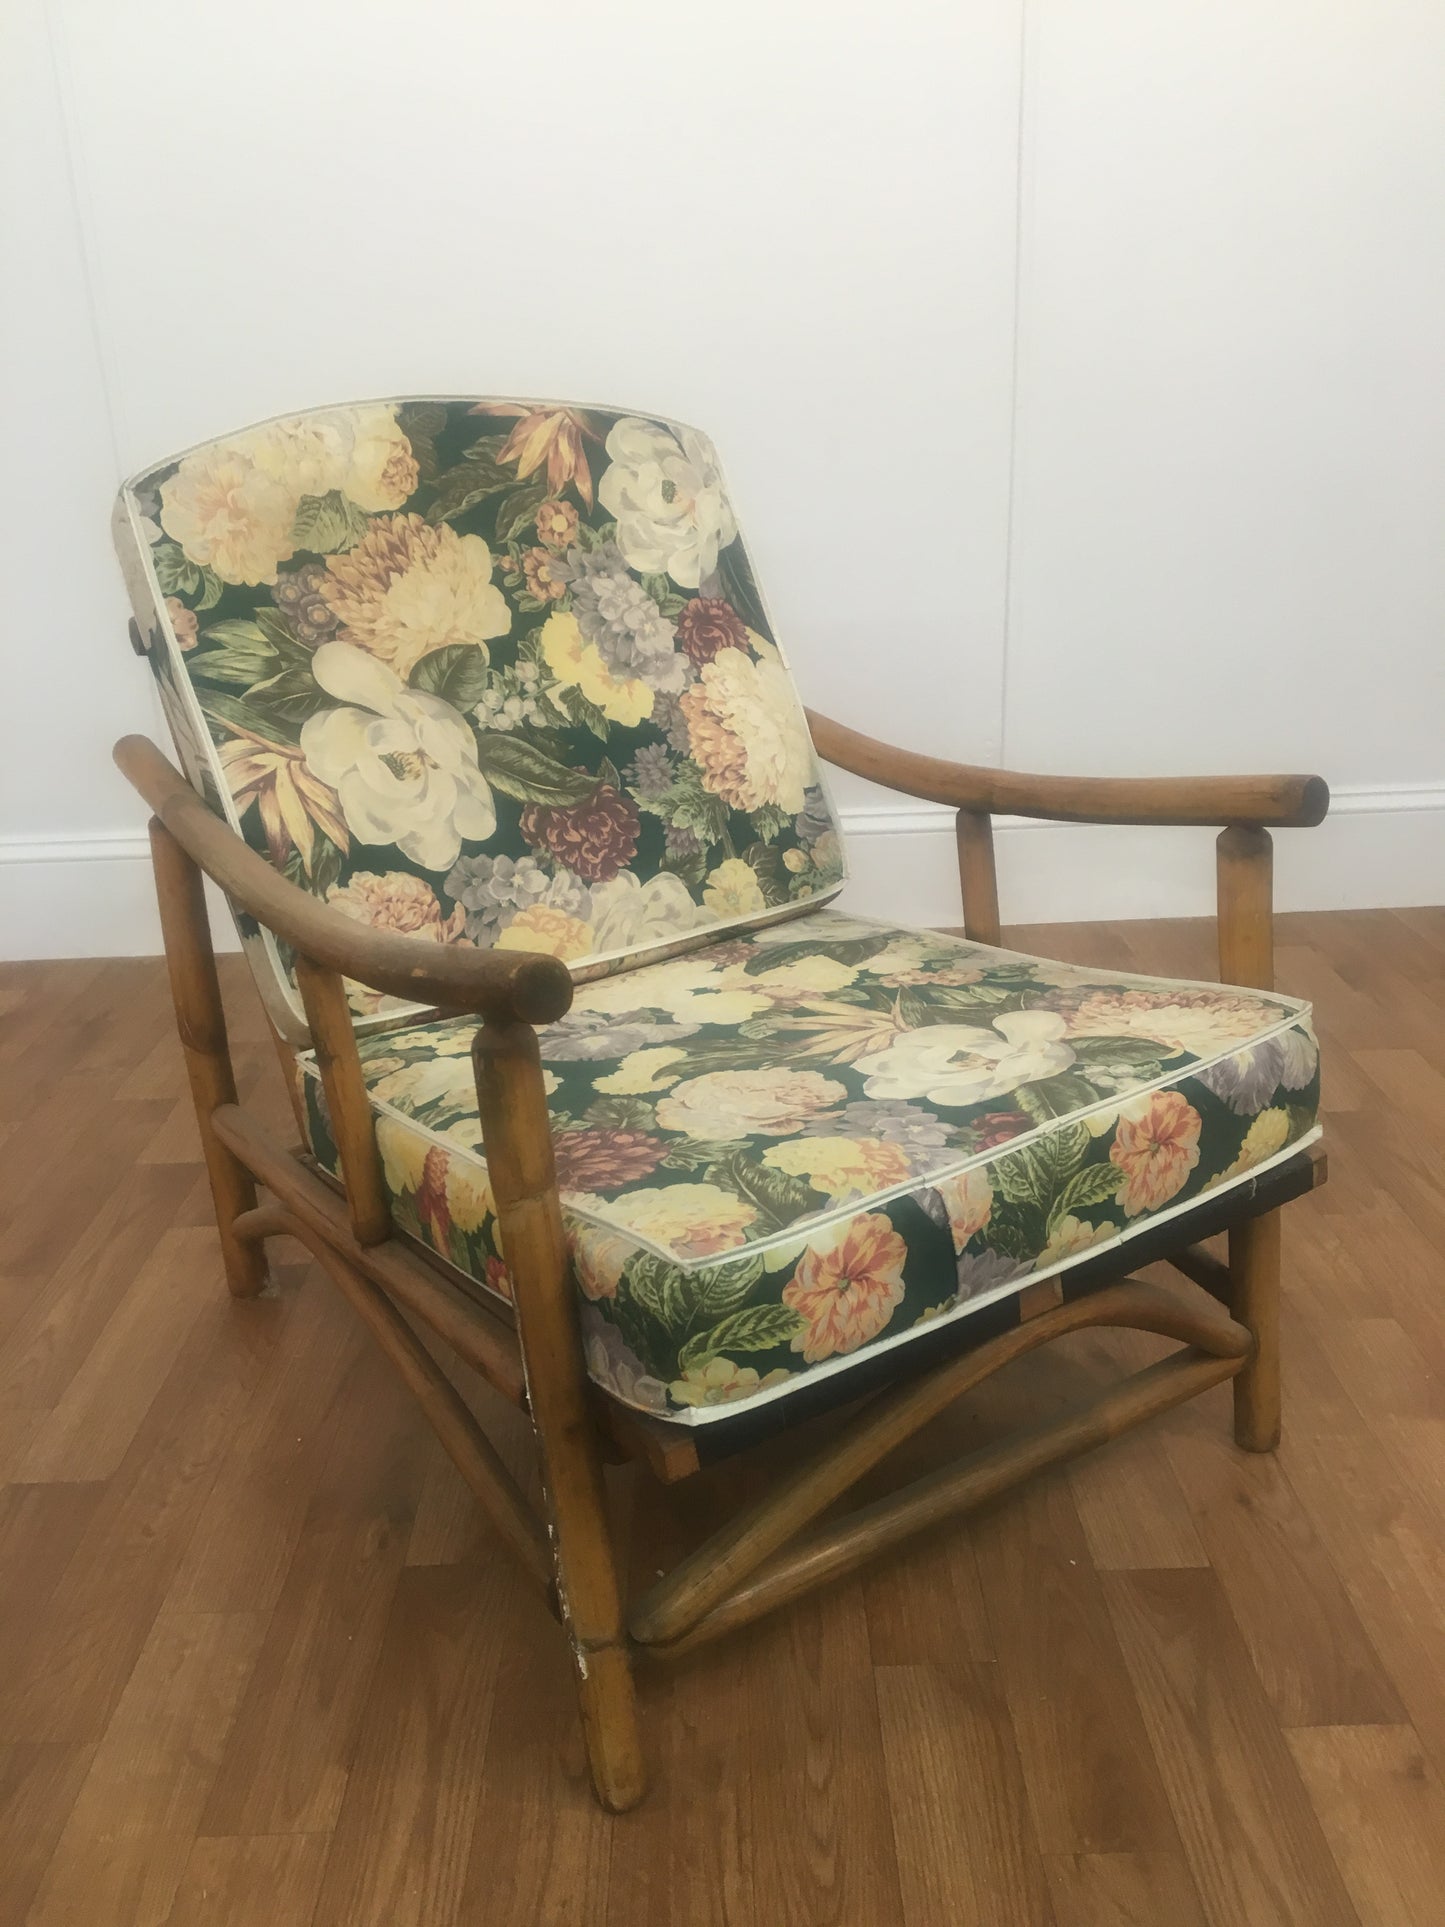 BAMBOO ARM CHAIR WITH FLORAL CUSHION